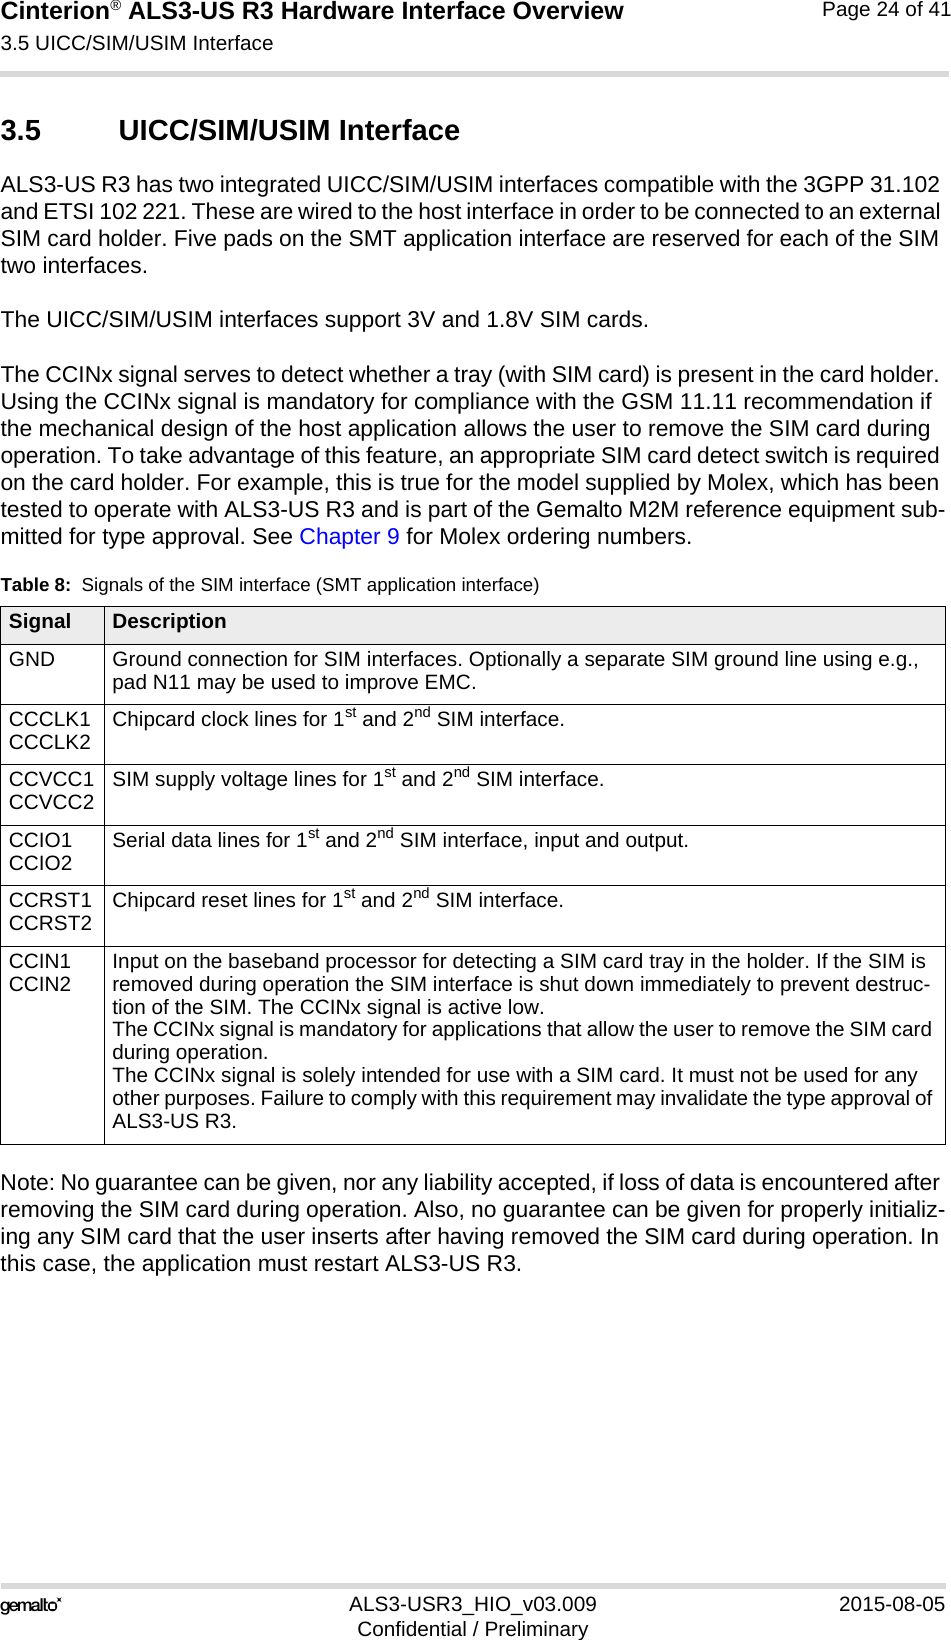 Cinterion® ALS3-US R3 Hardware Interface Overview3.5 UICC/SIM/USIM Interface27ALS3-USR3_HIO_v03.009 2015-08-05Confidential / PreliminaryPage 24 of 413.5 UICC/SIM/USIM InterfaceALS3-US R3 has two integrated UICC/SIM/USIM interfaces compatible with the 3GPP 31.102 and ETSI 102 221. These are wired to the host interface in order to be connected to an external SIM card holder. Five pads on the SMT application interface are reserved for each of the SIM two interfaces. The UICC/SIM/USIM interfaces support 3V and 1.8V SIM cards. The CCINx signal serves to detect whether a tray (with SIM card) is present in the card holder. Using the CCINx signal is mandatory for compliance with the GSM 11.11 recommendation if the mechanical design of the host application allows the user to remove the SIM card during operation. To take advantage of this feature, an appropriate SIM card detect switch is required on the card holder. For example, this is true for the model supplied by Molex, which has been tested to operate with ALS3-US R3 and is part of the Gemalto M2M reference equipment sub-mitted for type approval. See Chapter 9 for Molex ordering numbers.Note: No guarantee can be given, nor any liability accepted, if loss of data is encountered after removing the SIM card during operation. Also, no guarantee can be given for properly initializ-ing any SIM card that the user inserts after having removed the SIM card during operation. In this case, the application must restart ALS3-US R3.Table 8:  Signals of the SIM interface (SMT application interface)Signal DescriptionGND Ground connection for SIM interfaces. Optionally a separate SIM ground line using e.g., pad N11 may be used to improve EMC.CCCLK1CCCLK2 Chipcard clock lines for 1st and 2nd SIM interface.CCVCC1CCVCC2 SIM supply voltage lines for 1st and 2nd SIM interface.CCIO1CCIO2 Serial data lines for 1st and 2nd SIM interface, input and output.CCRST1CCRST2 Chipcard reset lines for 1st and 2nd SIM interface.CCIN1CCIN2 Input on the baseband processor for detecting a SIM card tray in the holder. If the SIM is removed during operation the SIM interface is shut down immediately to prevent destruc-tion of the SIM. The CCINx signal is active low.The CCINx signal is mandatory for applications that allow the user to remove the SIM card during operation. The CCINx signal is solely intended for use with a SIM card. It must not be used for any other purposes. Failure to comply with this requirement may invalidate the type approval of ALS3-US R3.